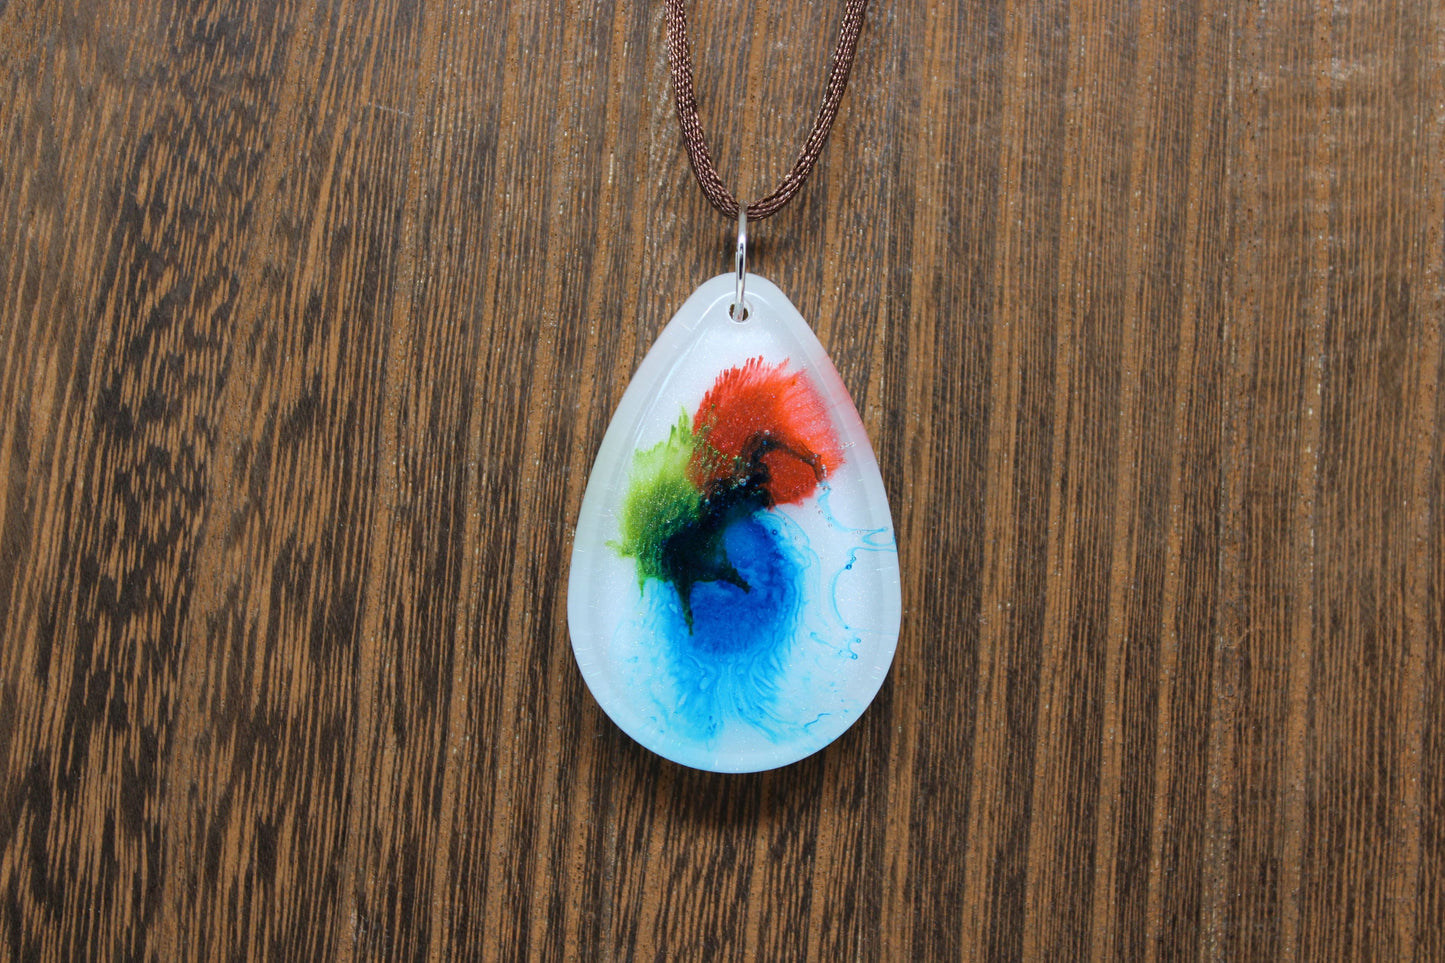 Hand-Poured Resin and Alcohol Ink Chunky Necklace - Droplet - Blue/Green/Red